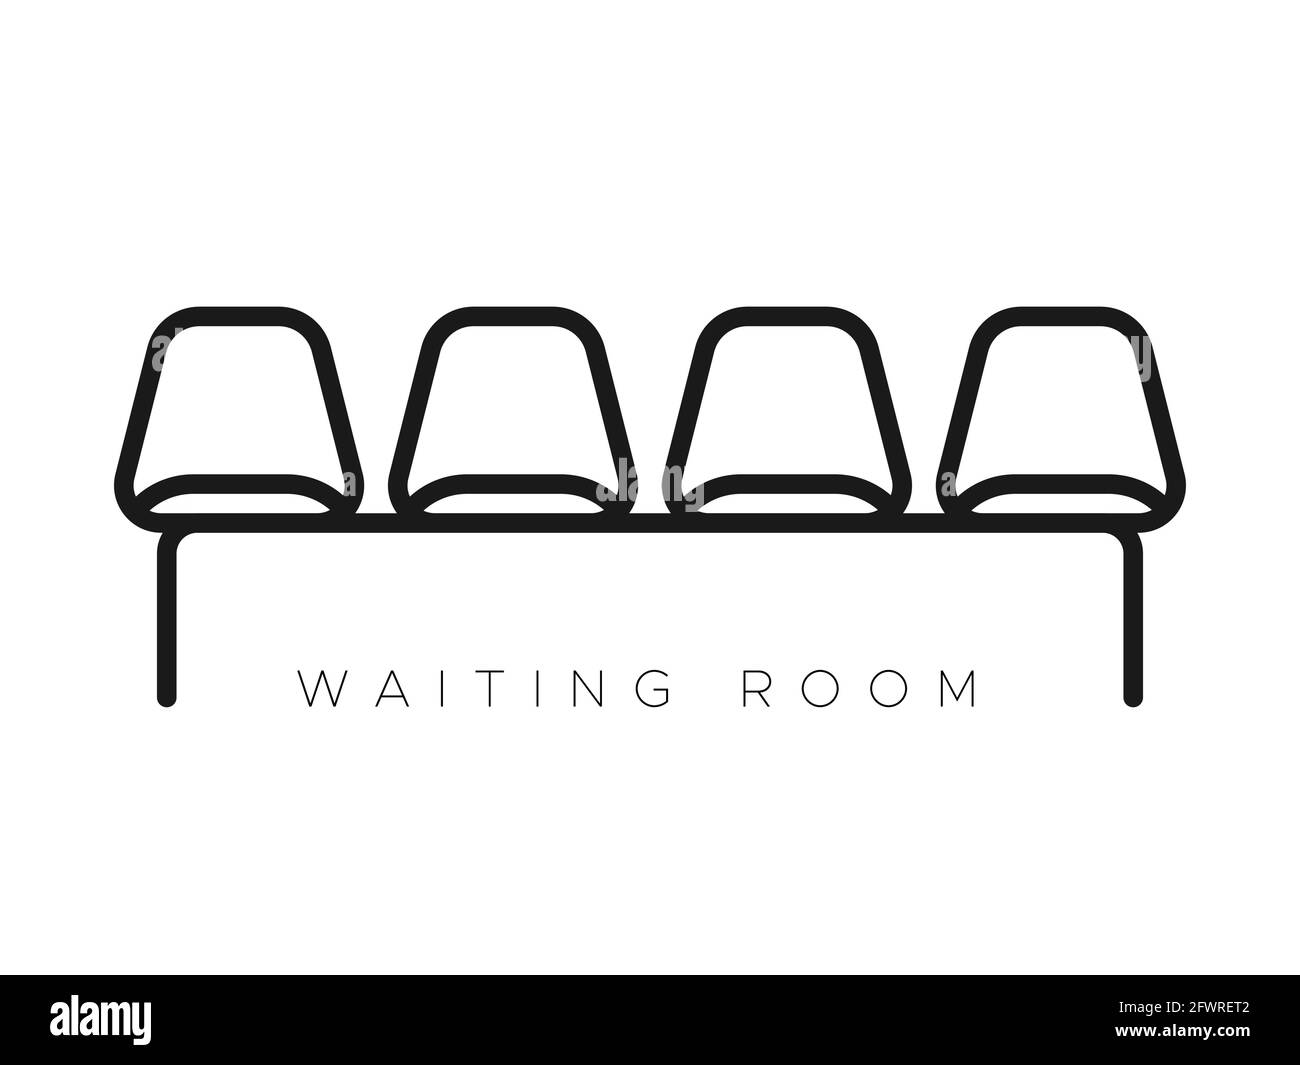 Waiting room icon. Black thick outline. Four empty chairs with text. Vector illustration, flat design Stock Vector